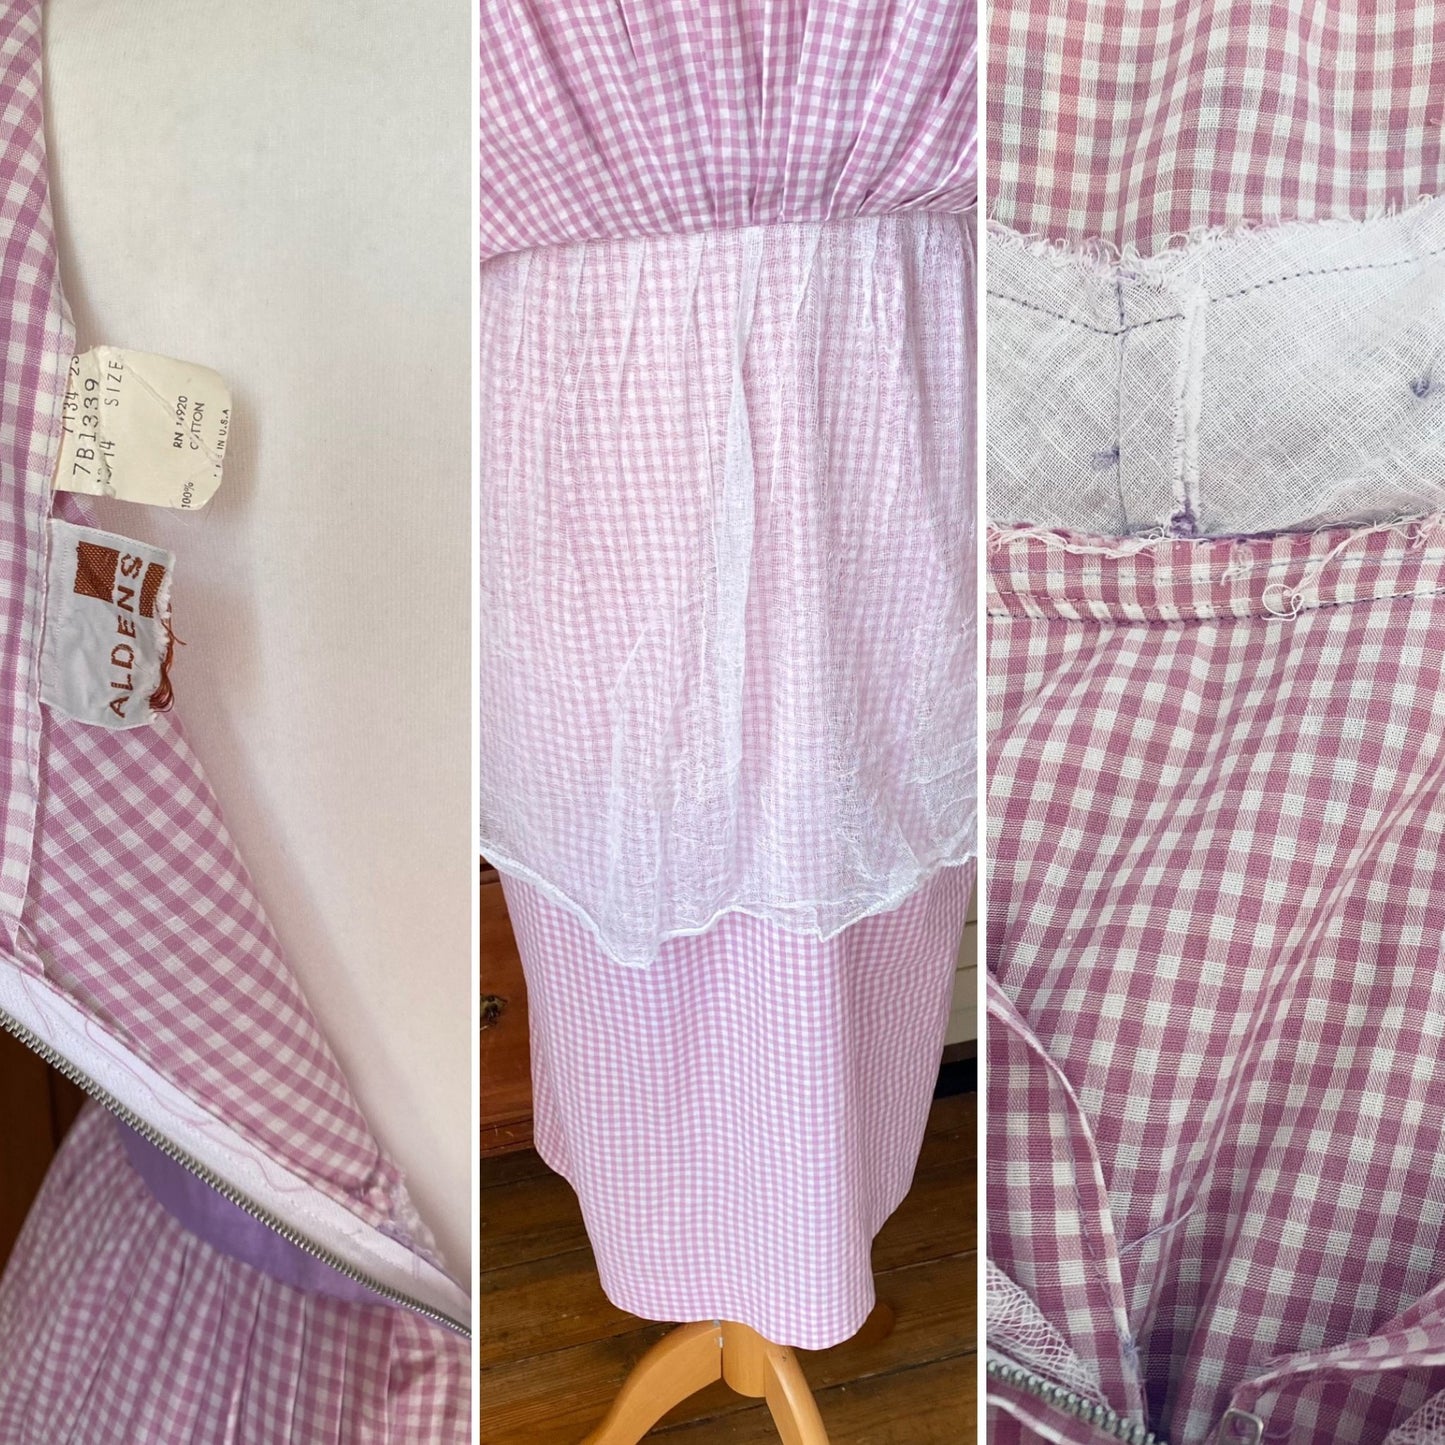 50s Lilac Gingham Cotton Summer Dress with waist bow. Approx UK size 8-10